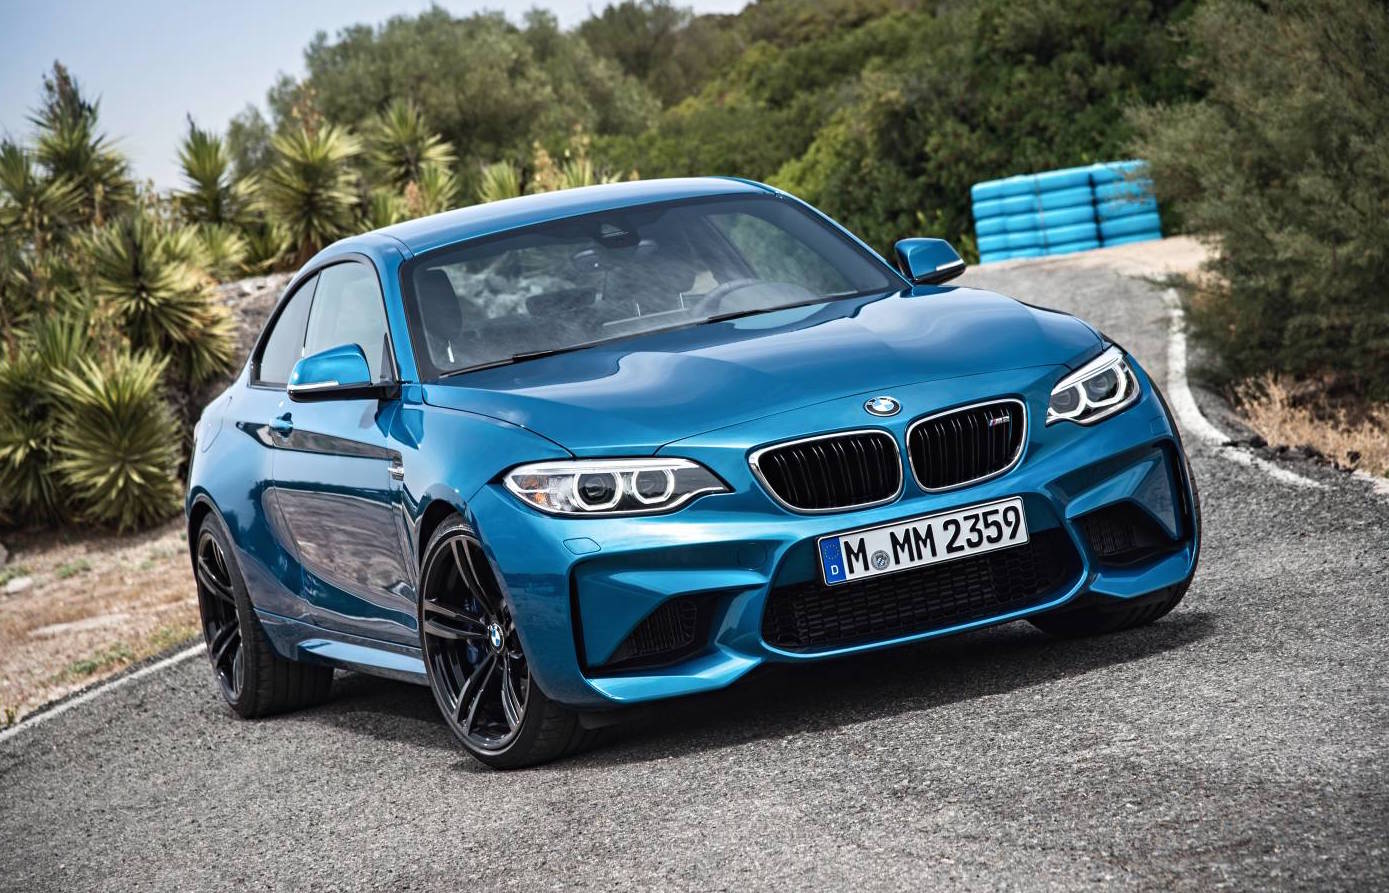 BMW Australia confirms local M2 prices, $89,900 for Pure edition